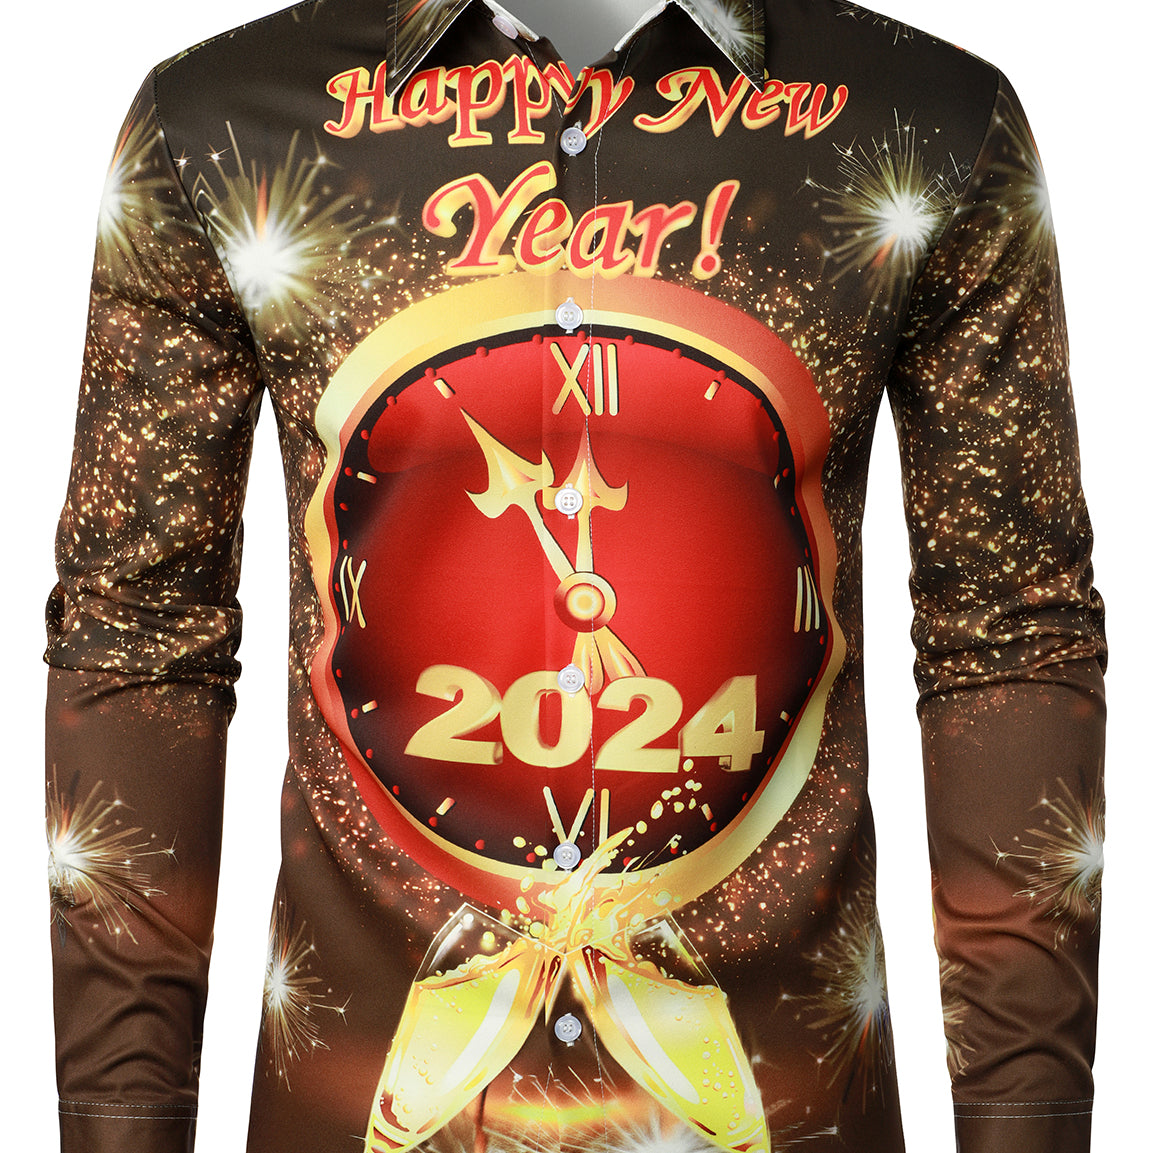 Men's Happy New Year Eve Funny Countdown Clock Christmas Button Up Long Sleeve Shirt